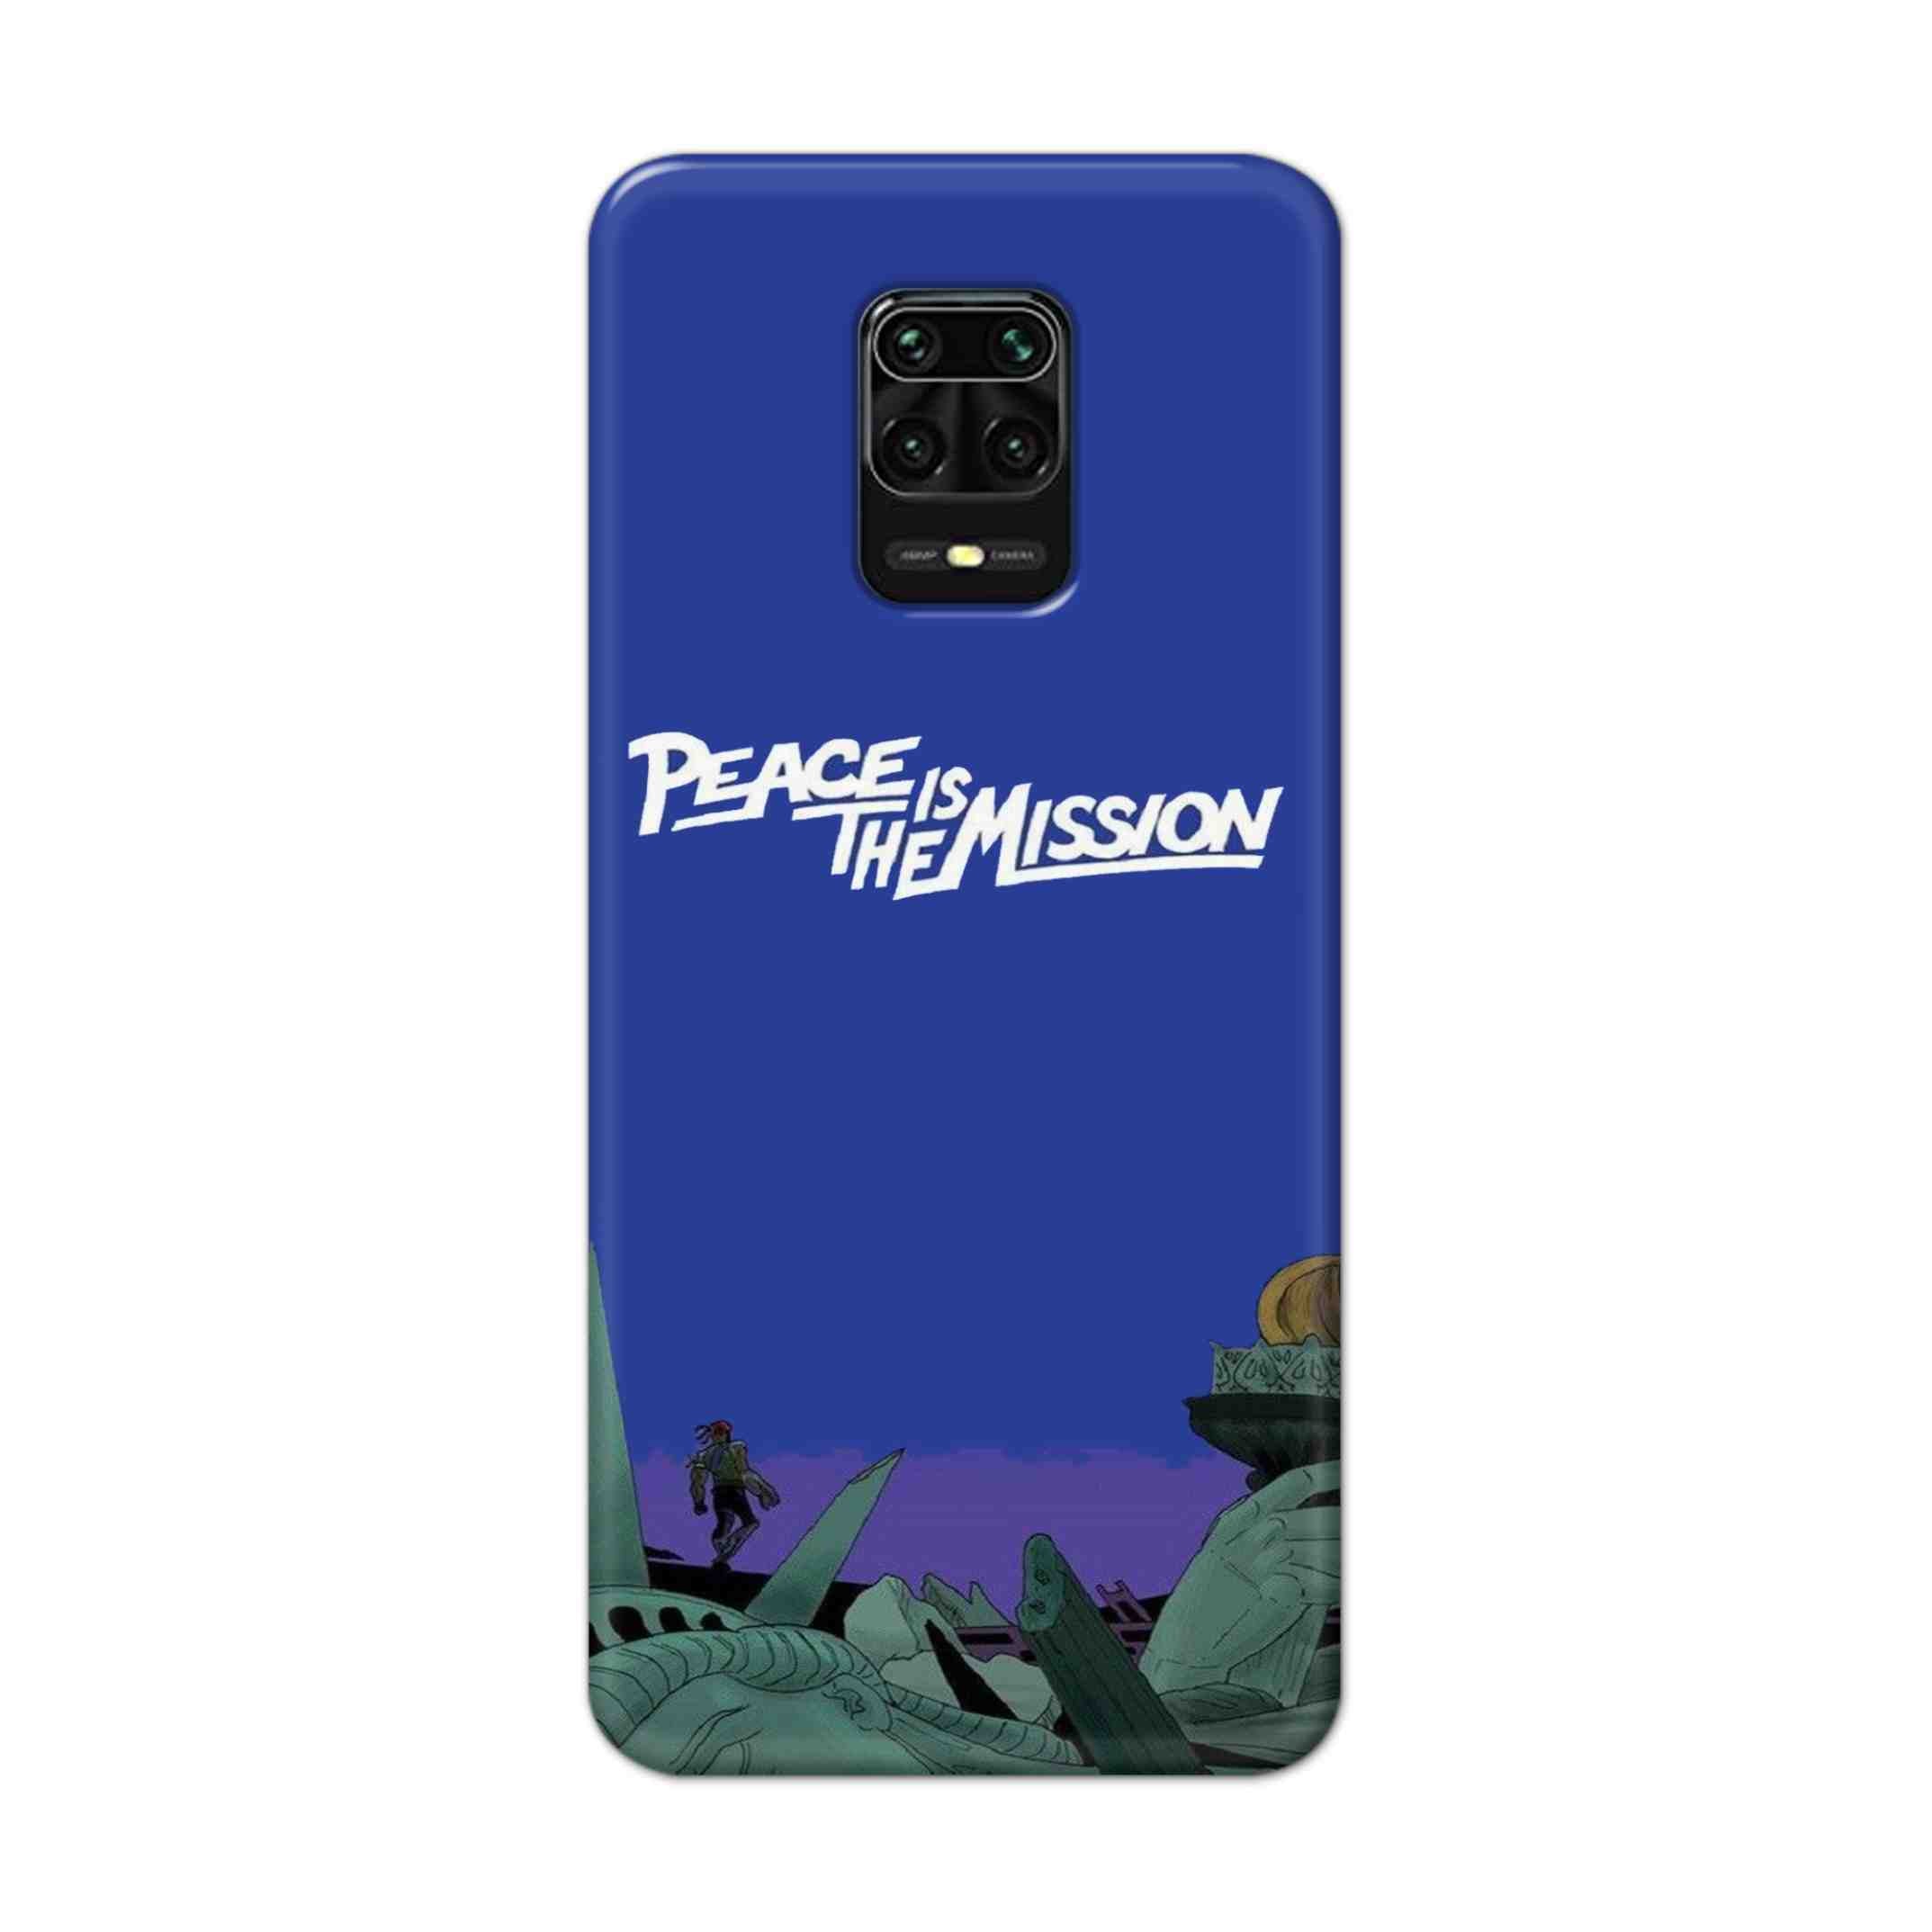 Buy Peace Is The Misson Hard Back Mobile Phone Case Cover For Redmi Note 9 Pro Online